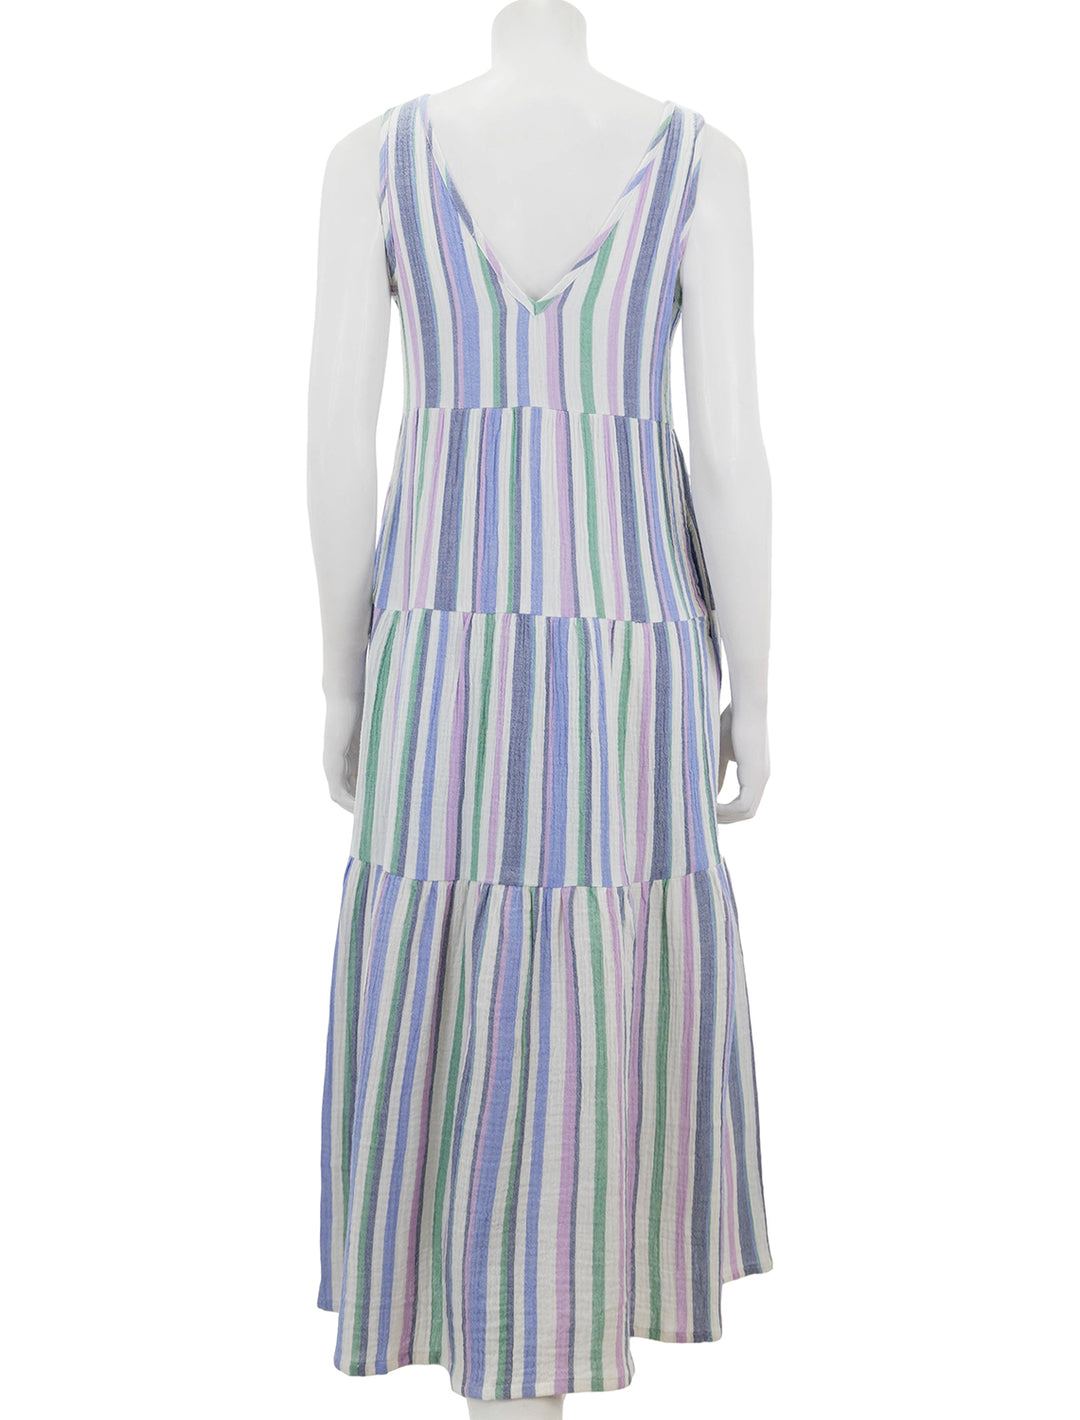 Back view of Marine Layer's corinne maxi dress in cool stripe.